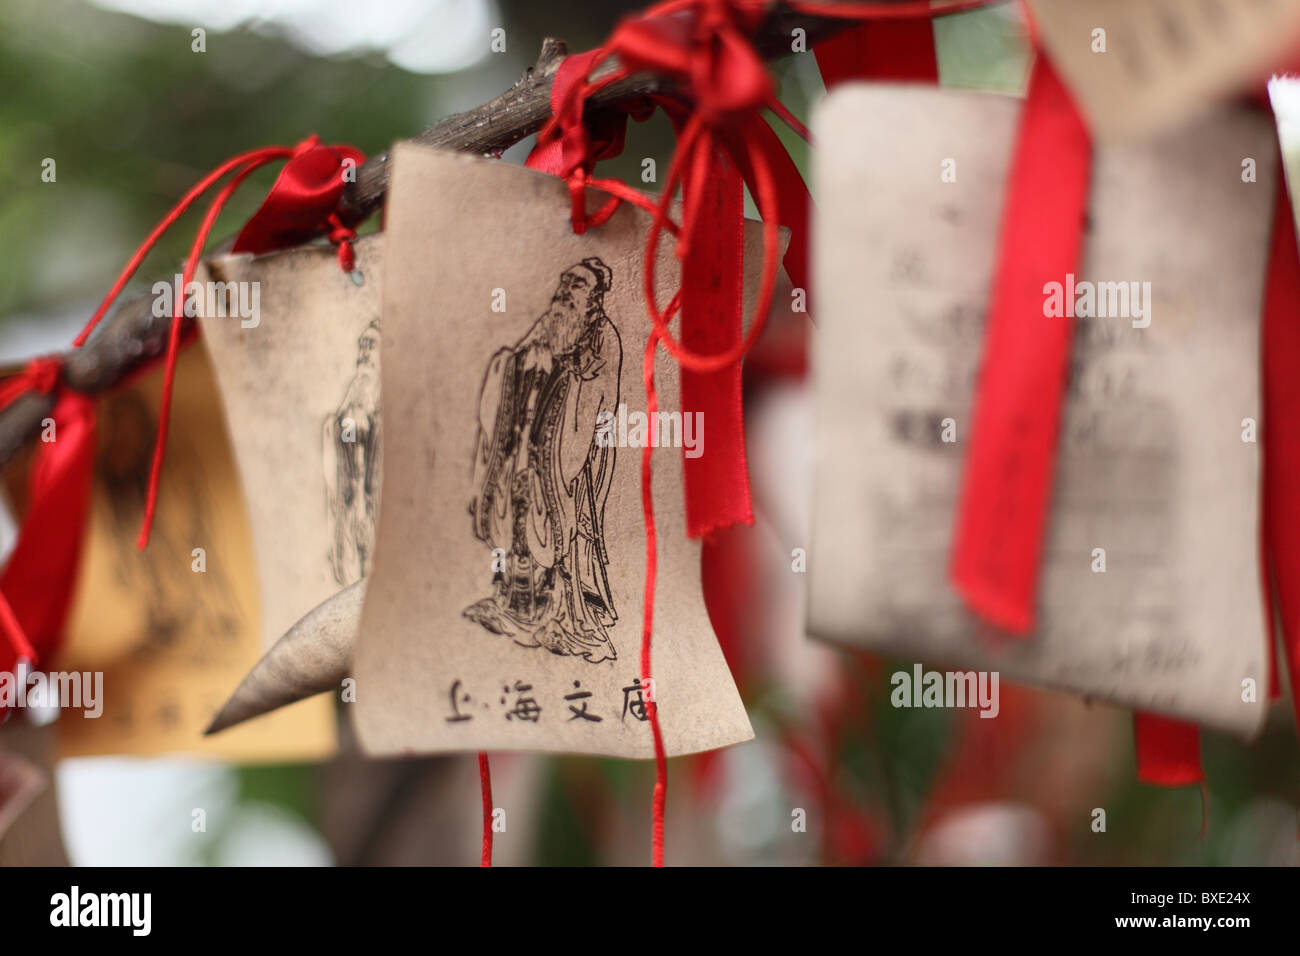 Paper prayers and wishes at Temple of Confucius in Shanghai, China Stock Photo